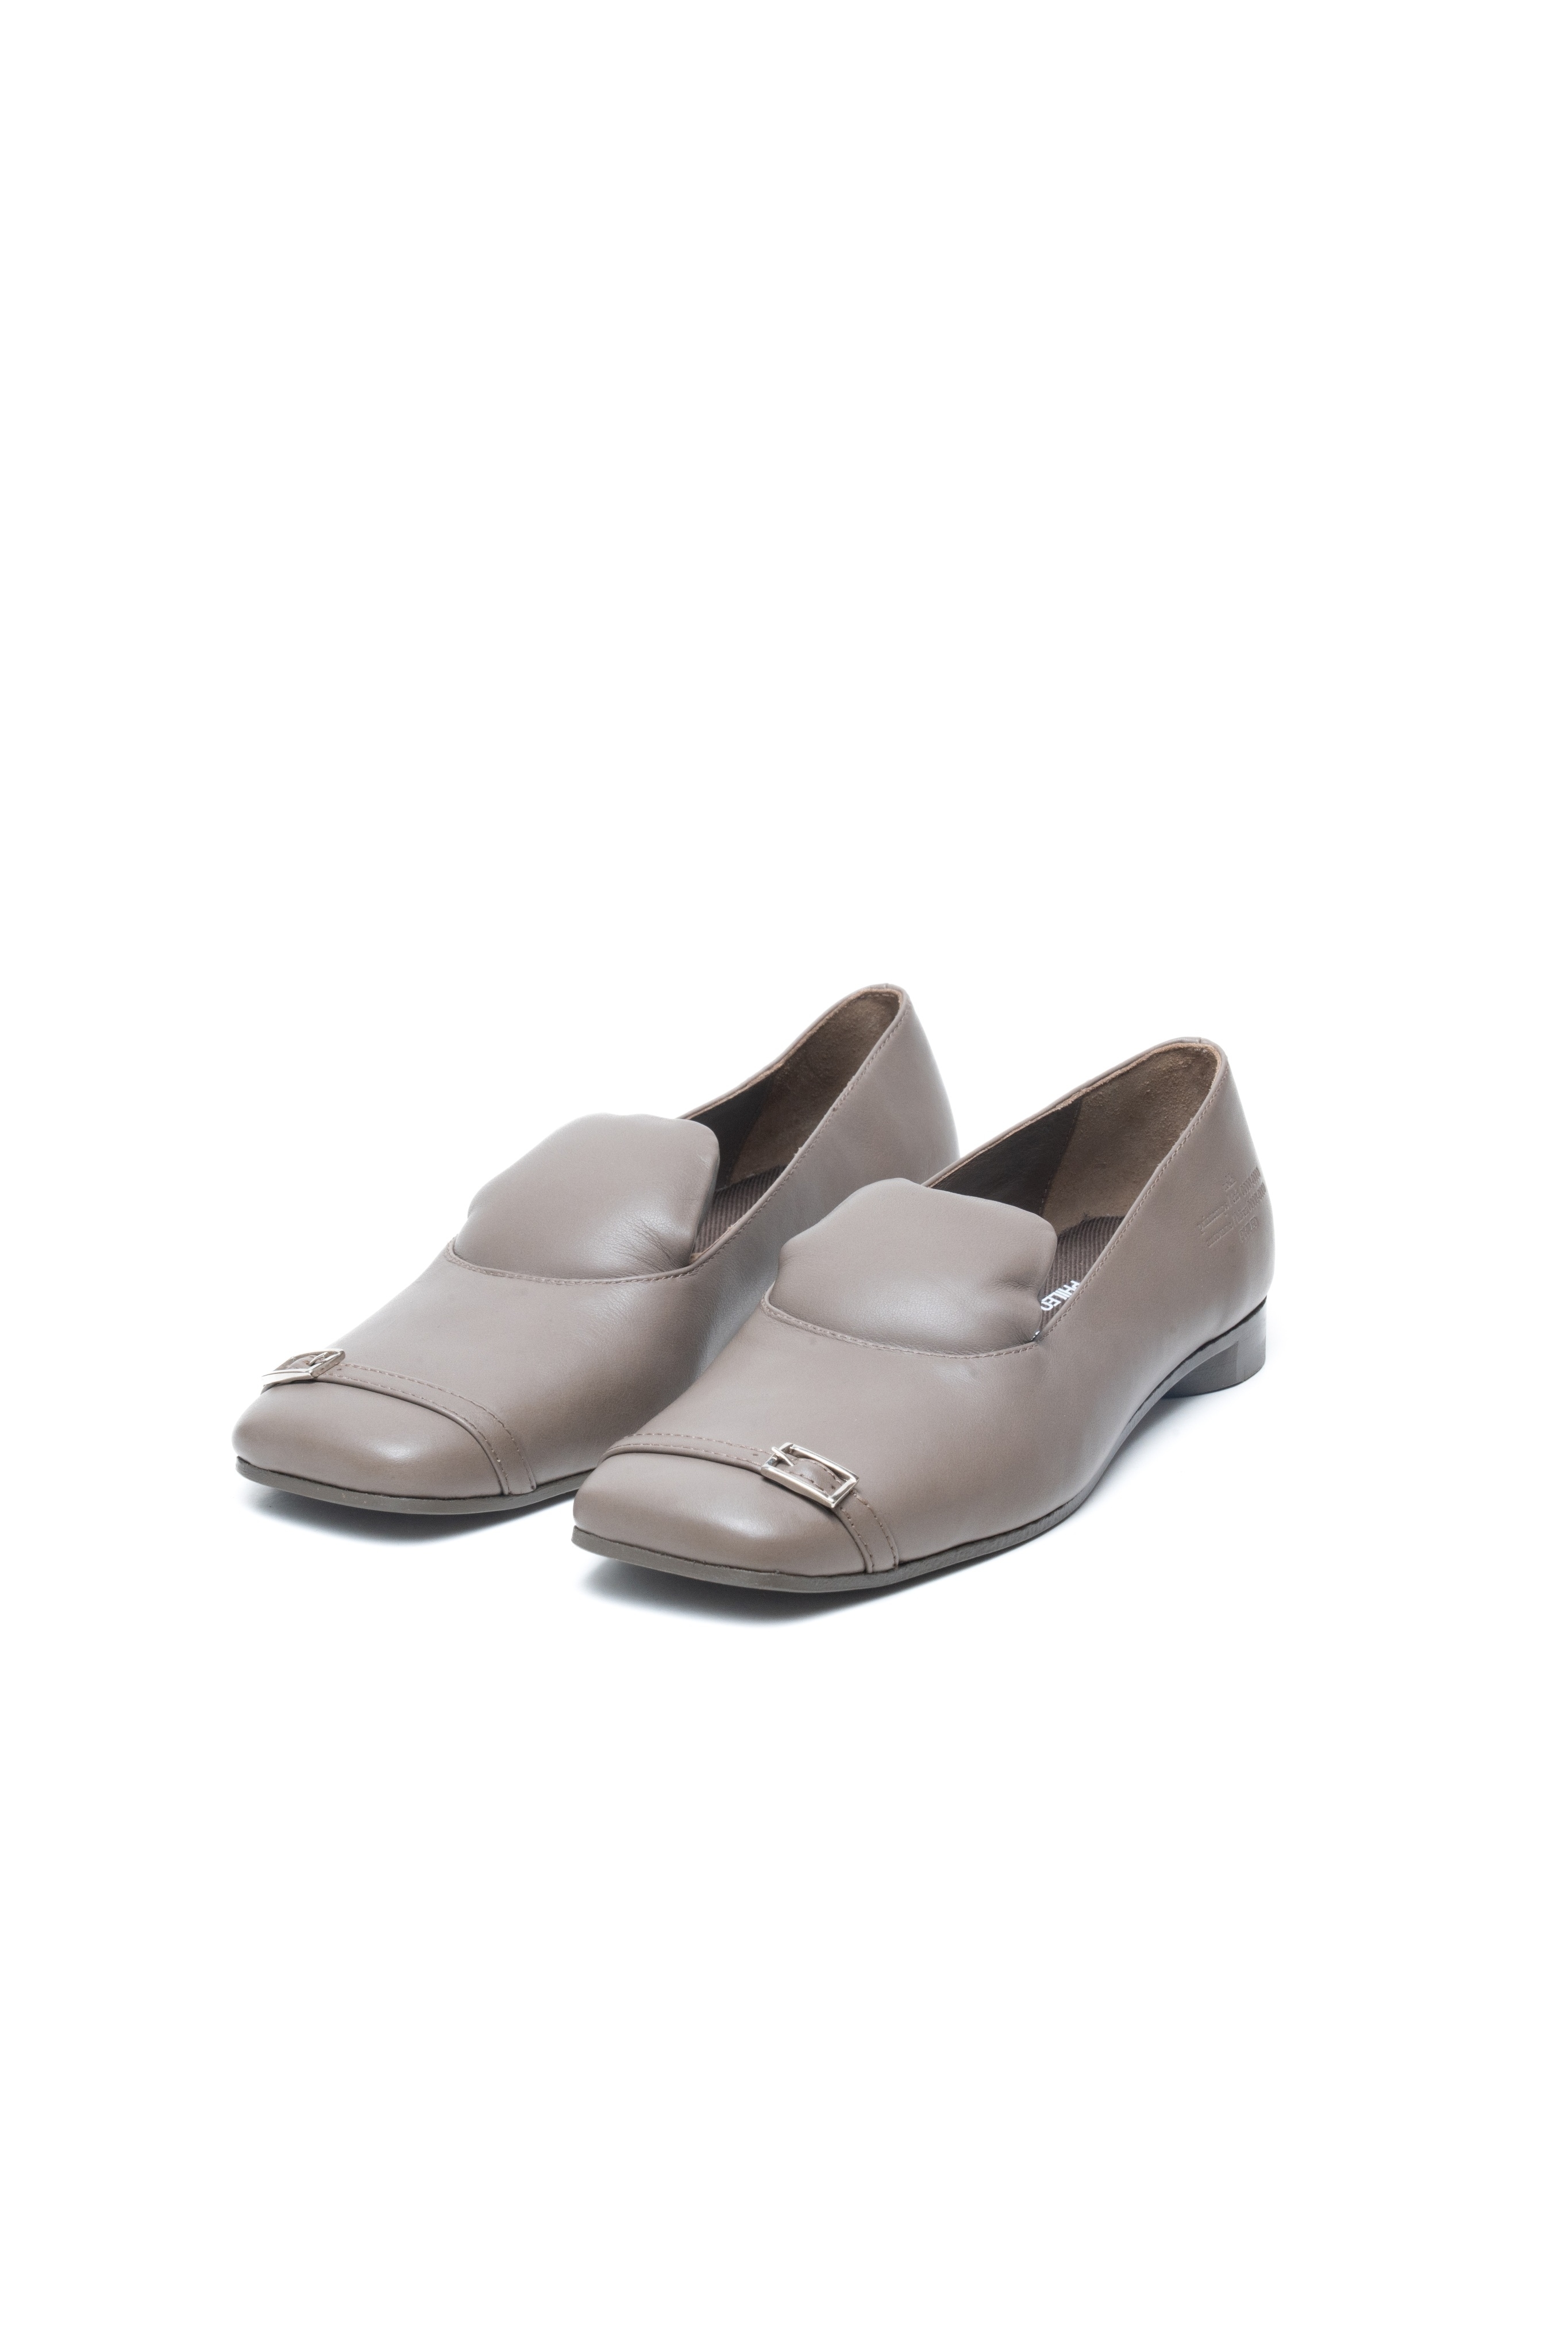 A pair of elegant flat shoes with a metallic buckle detail